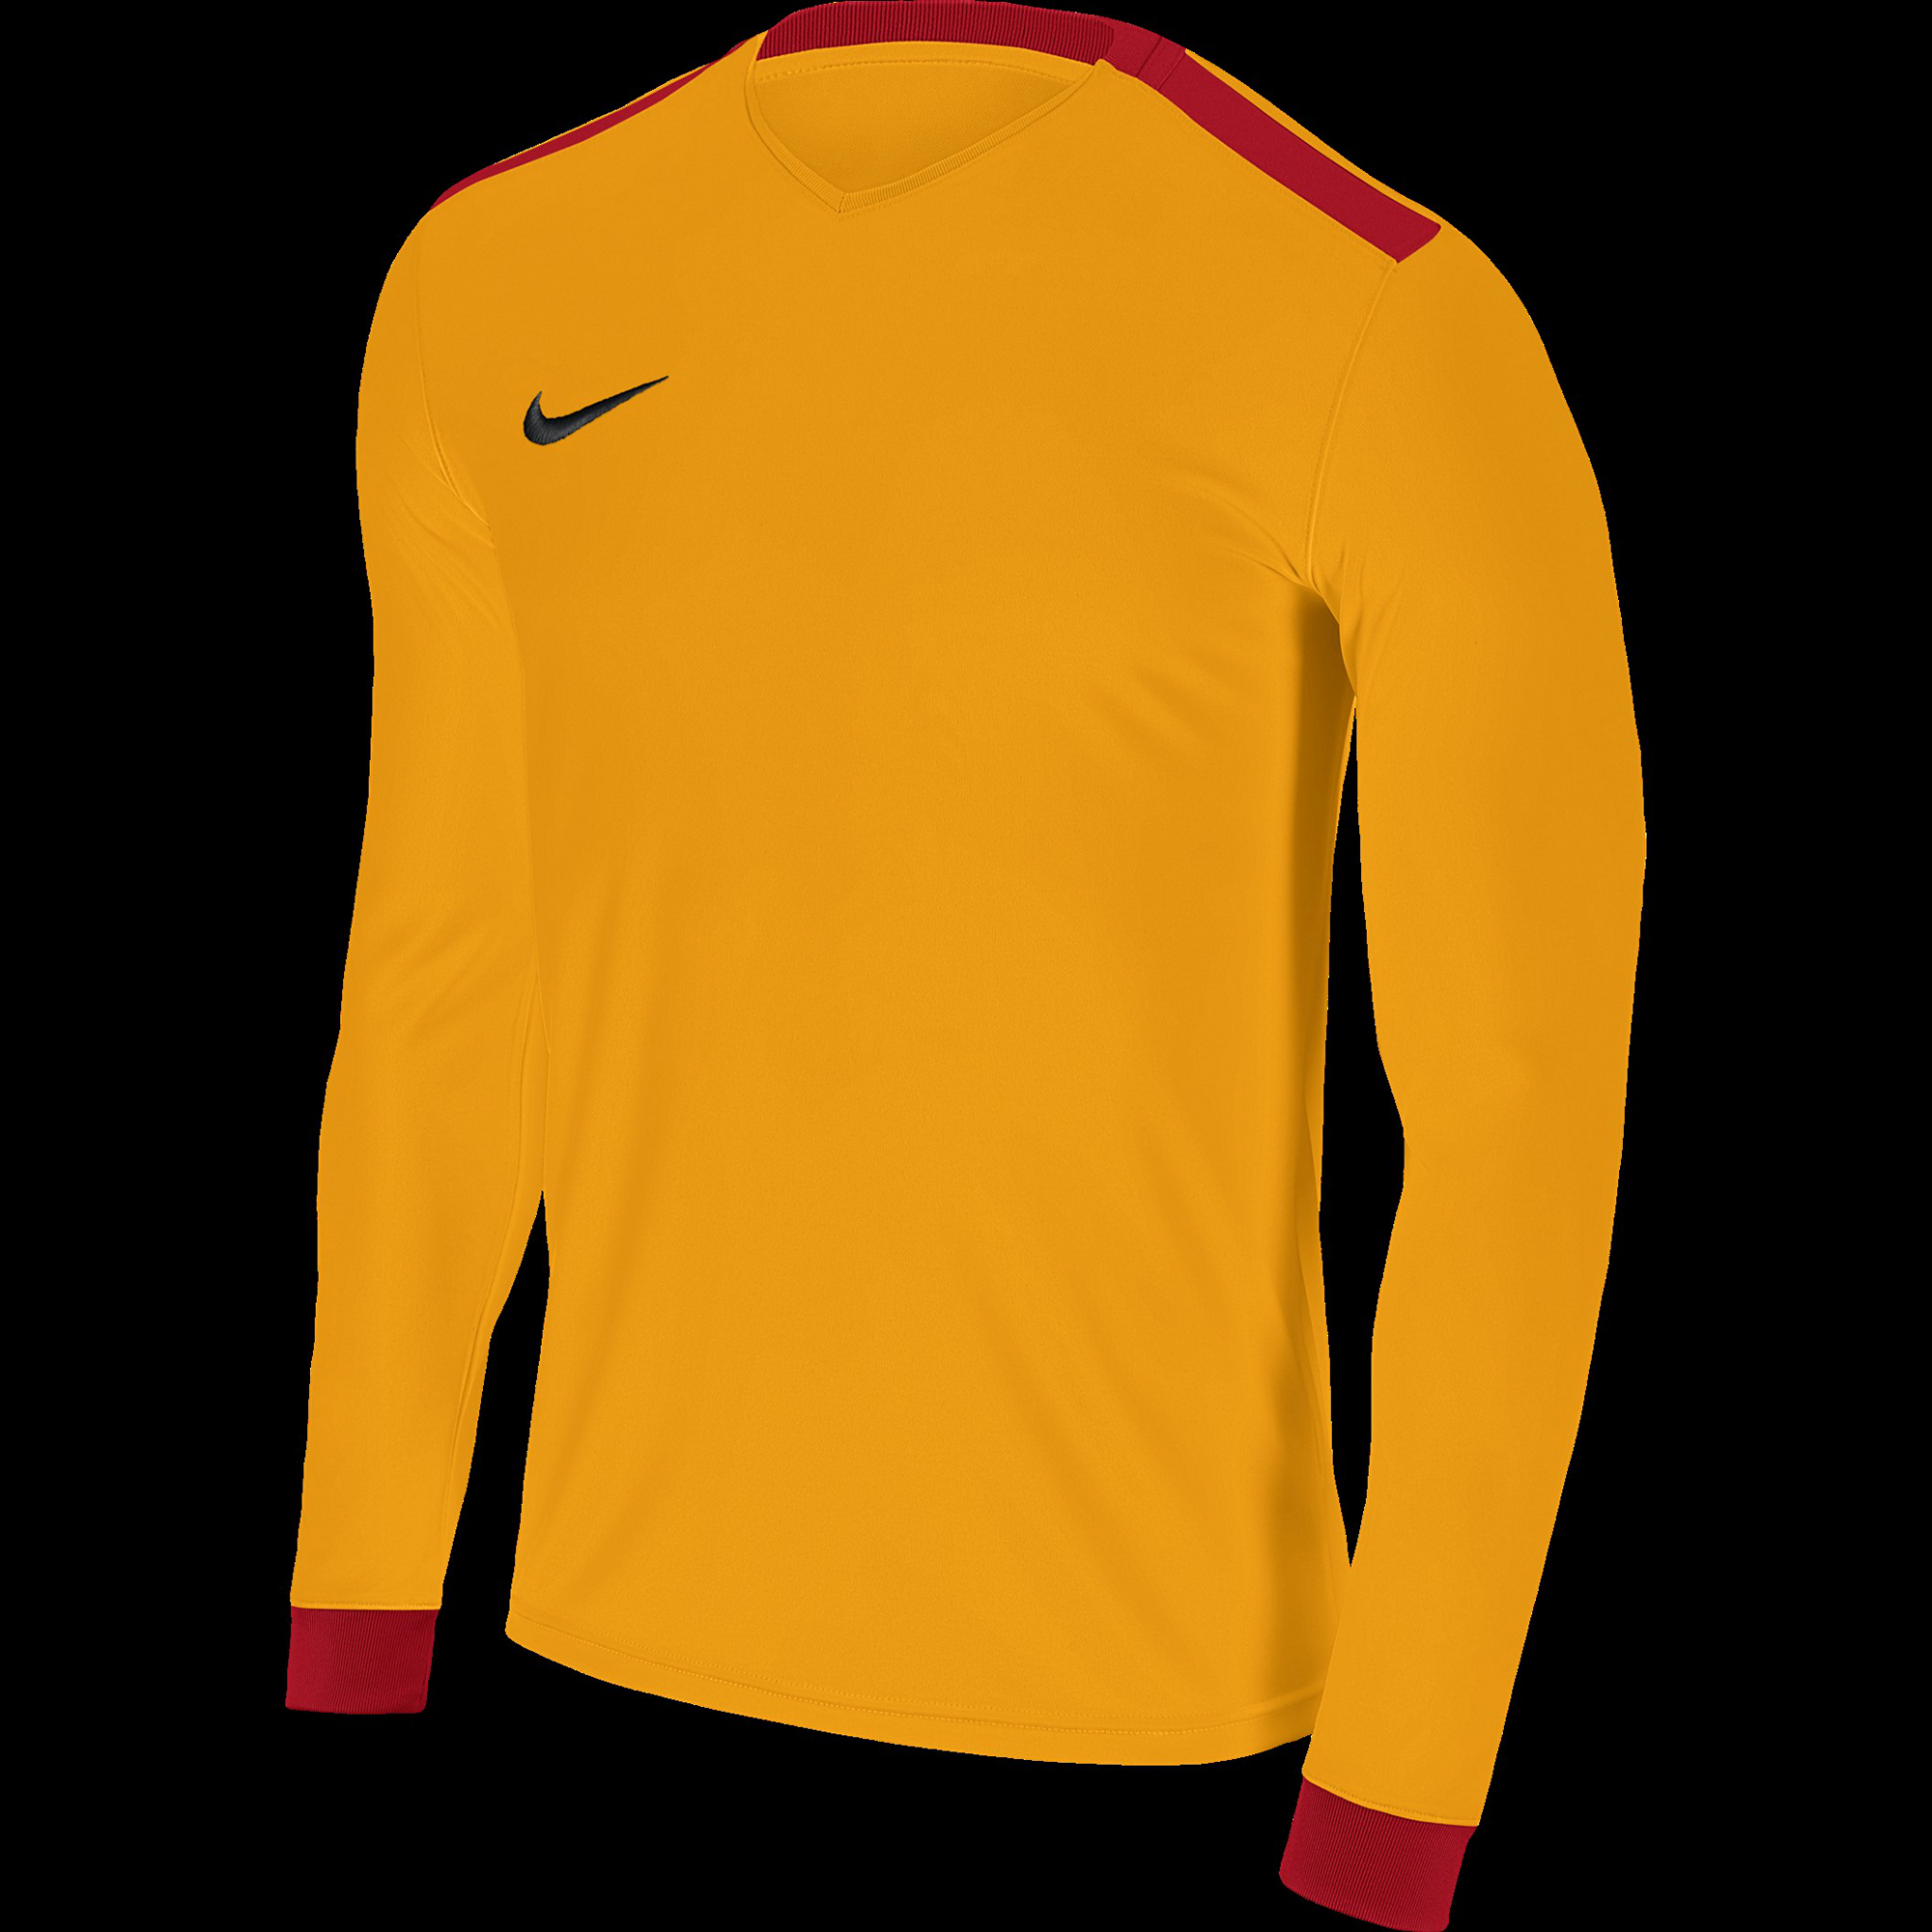 red and gold nike shirt